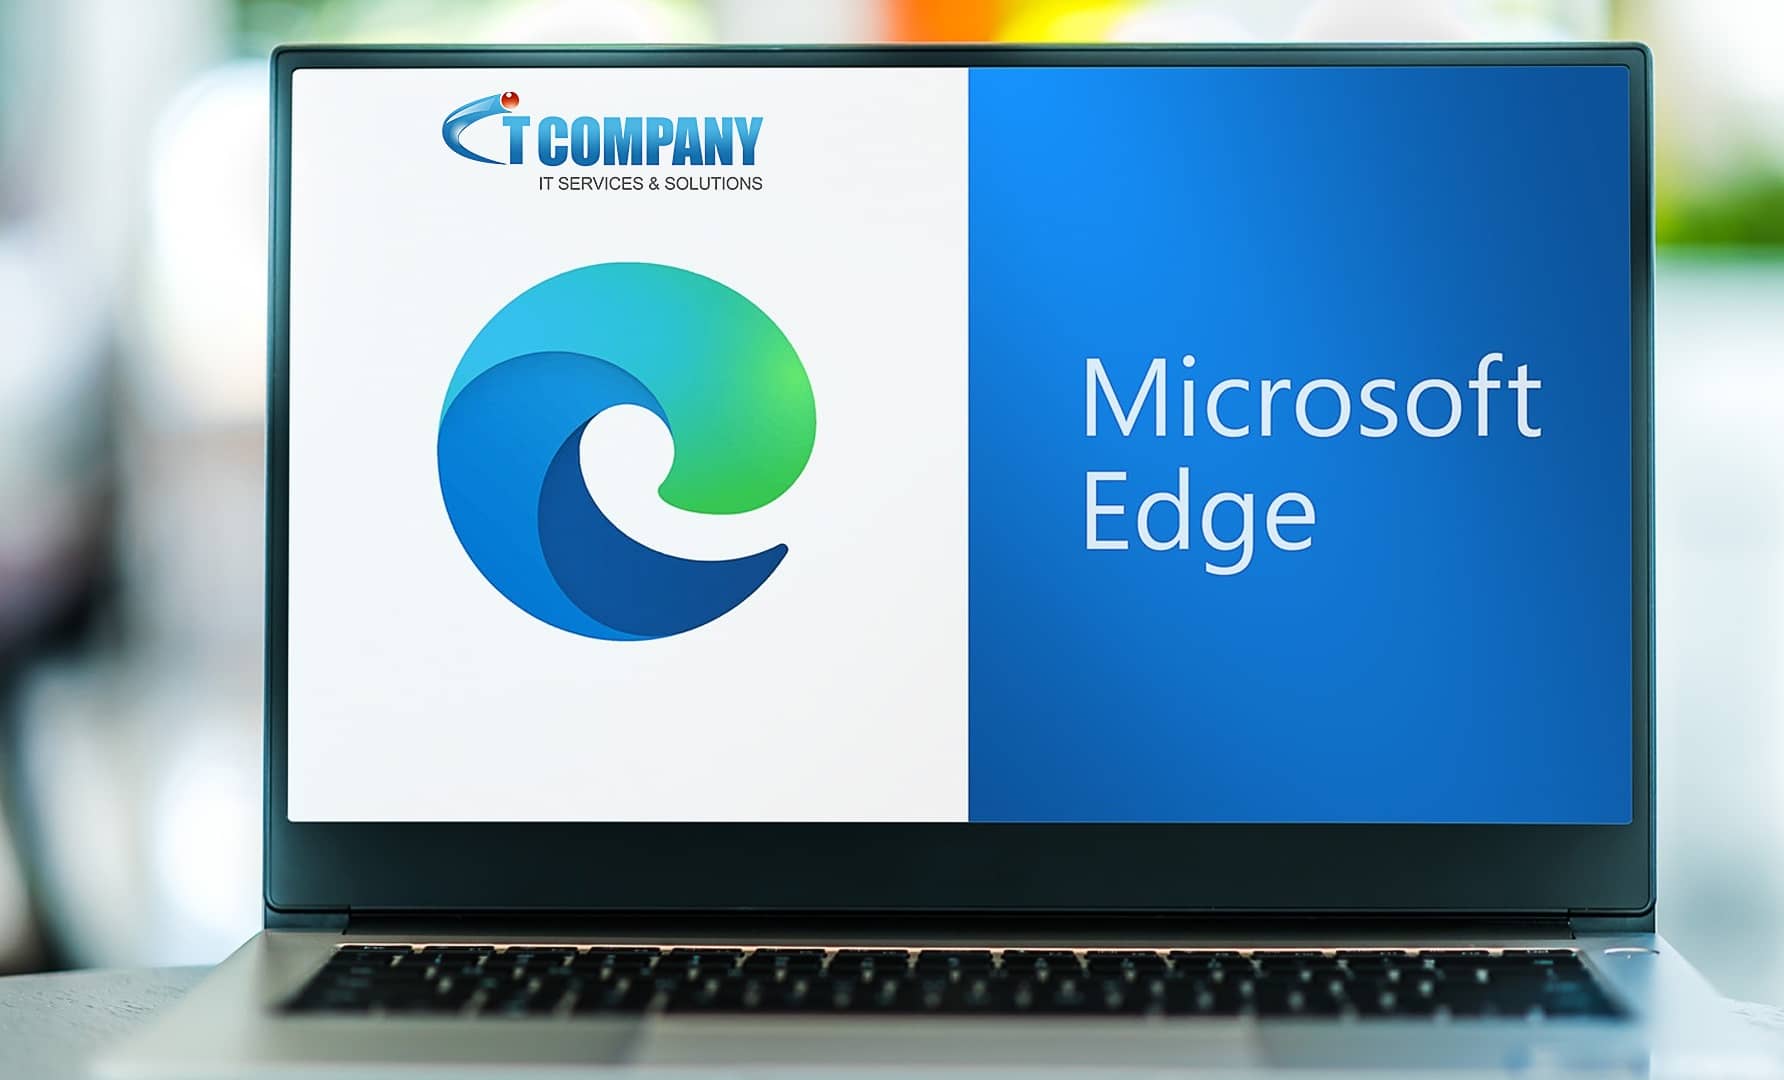 Microsoft joins the VPN battle with a new service integrated within Edge